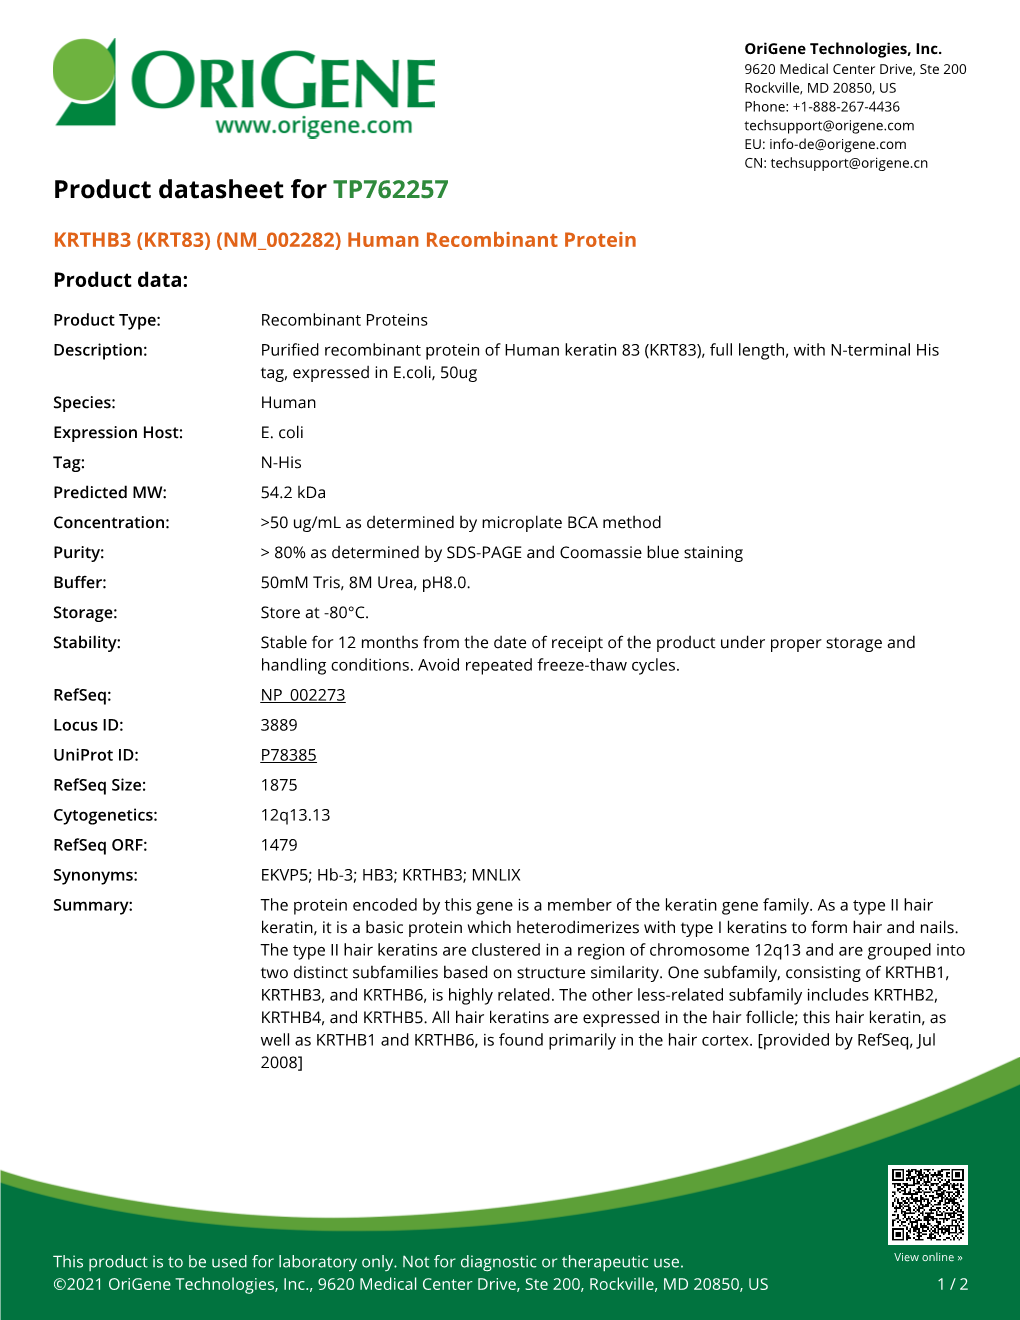 KRTHB3 (KRT83) (NM 002282) Human Recombinant Protein Product Data